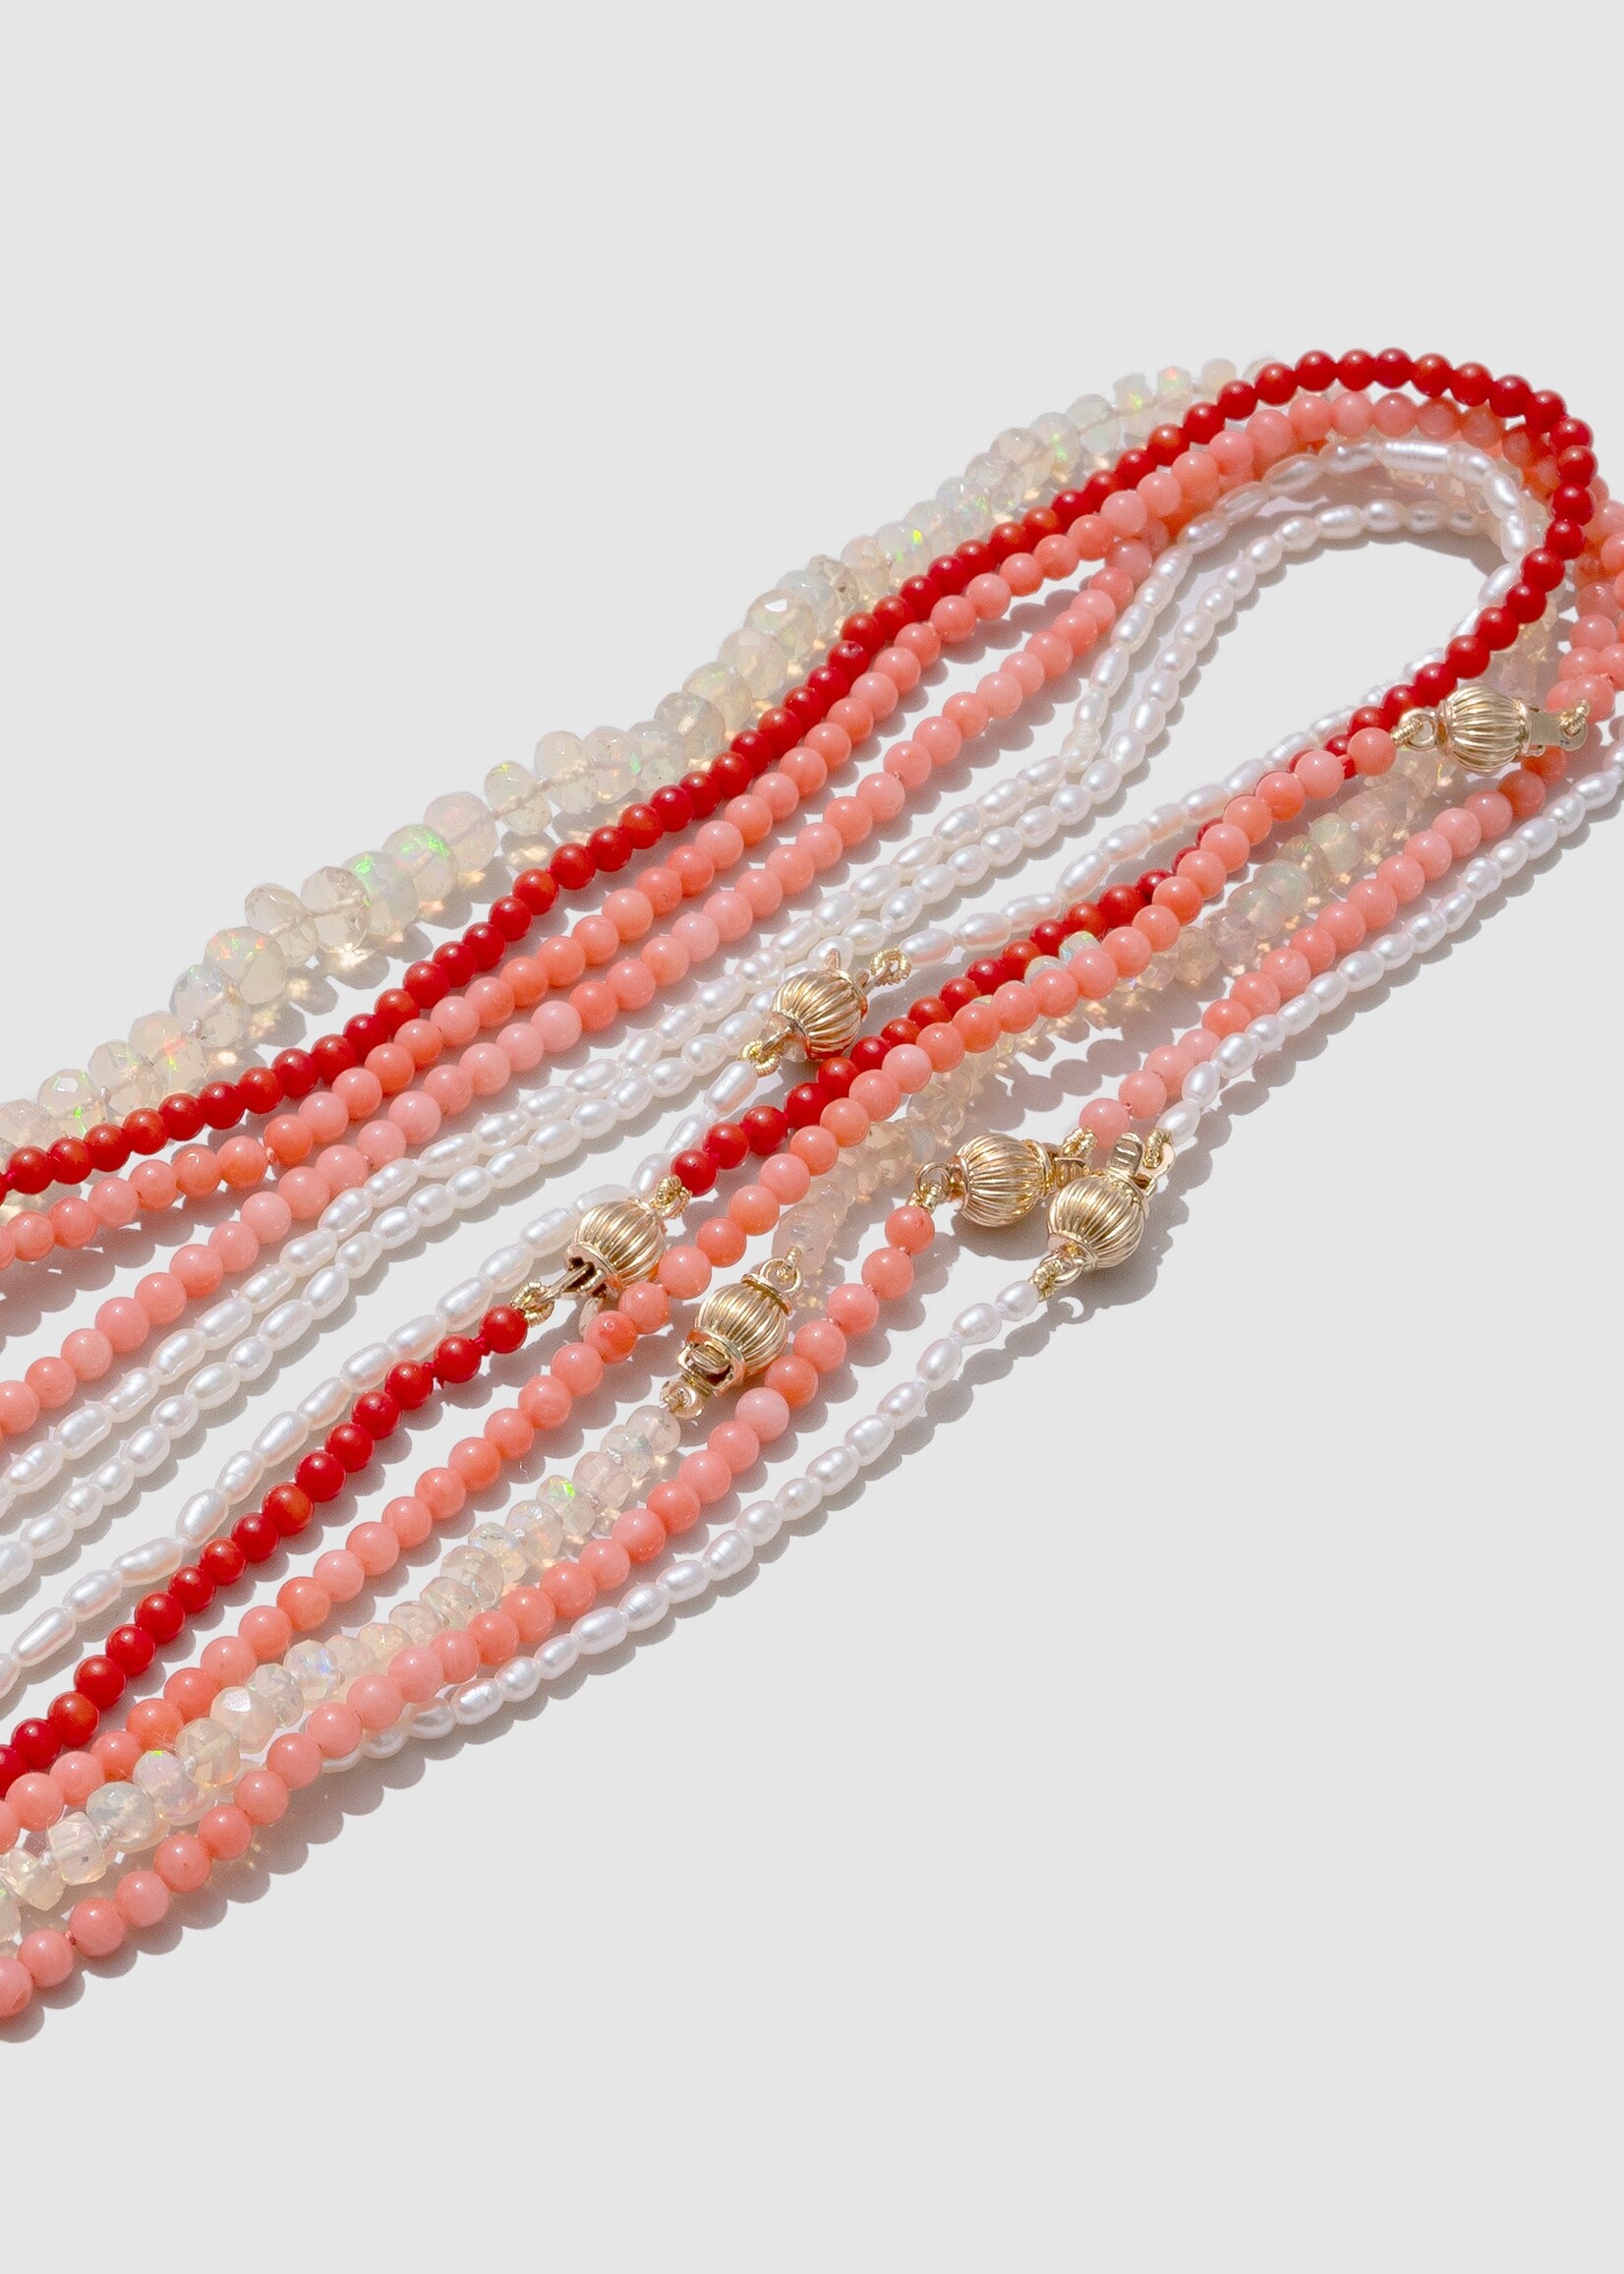 BEATRICE VALENZUELA BAMBOO CORAL NECKLACE